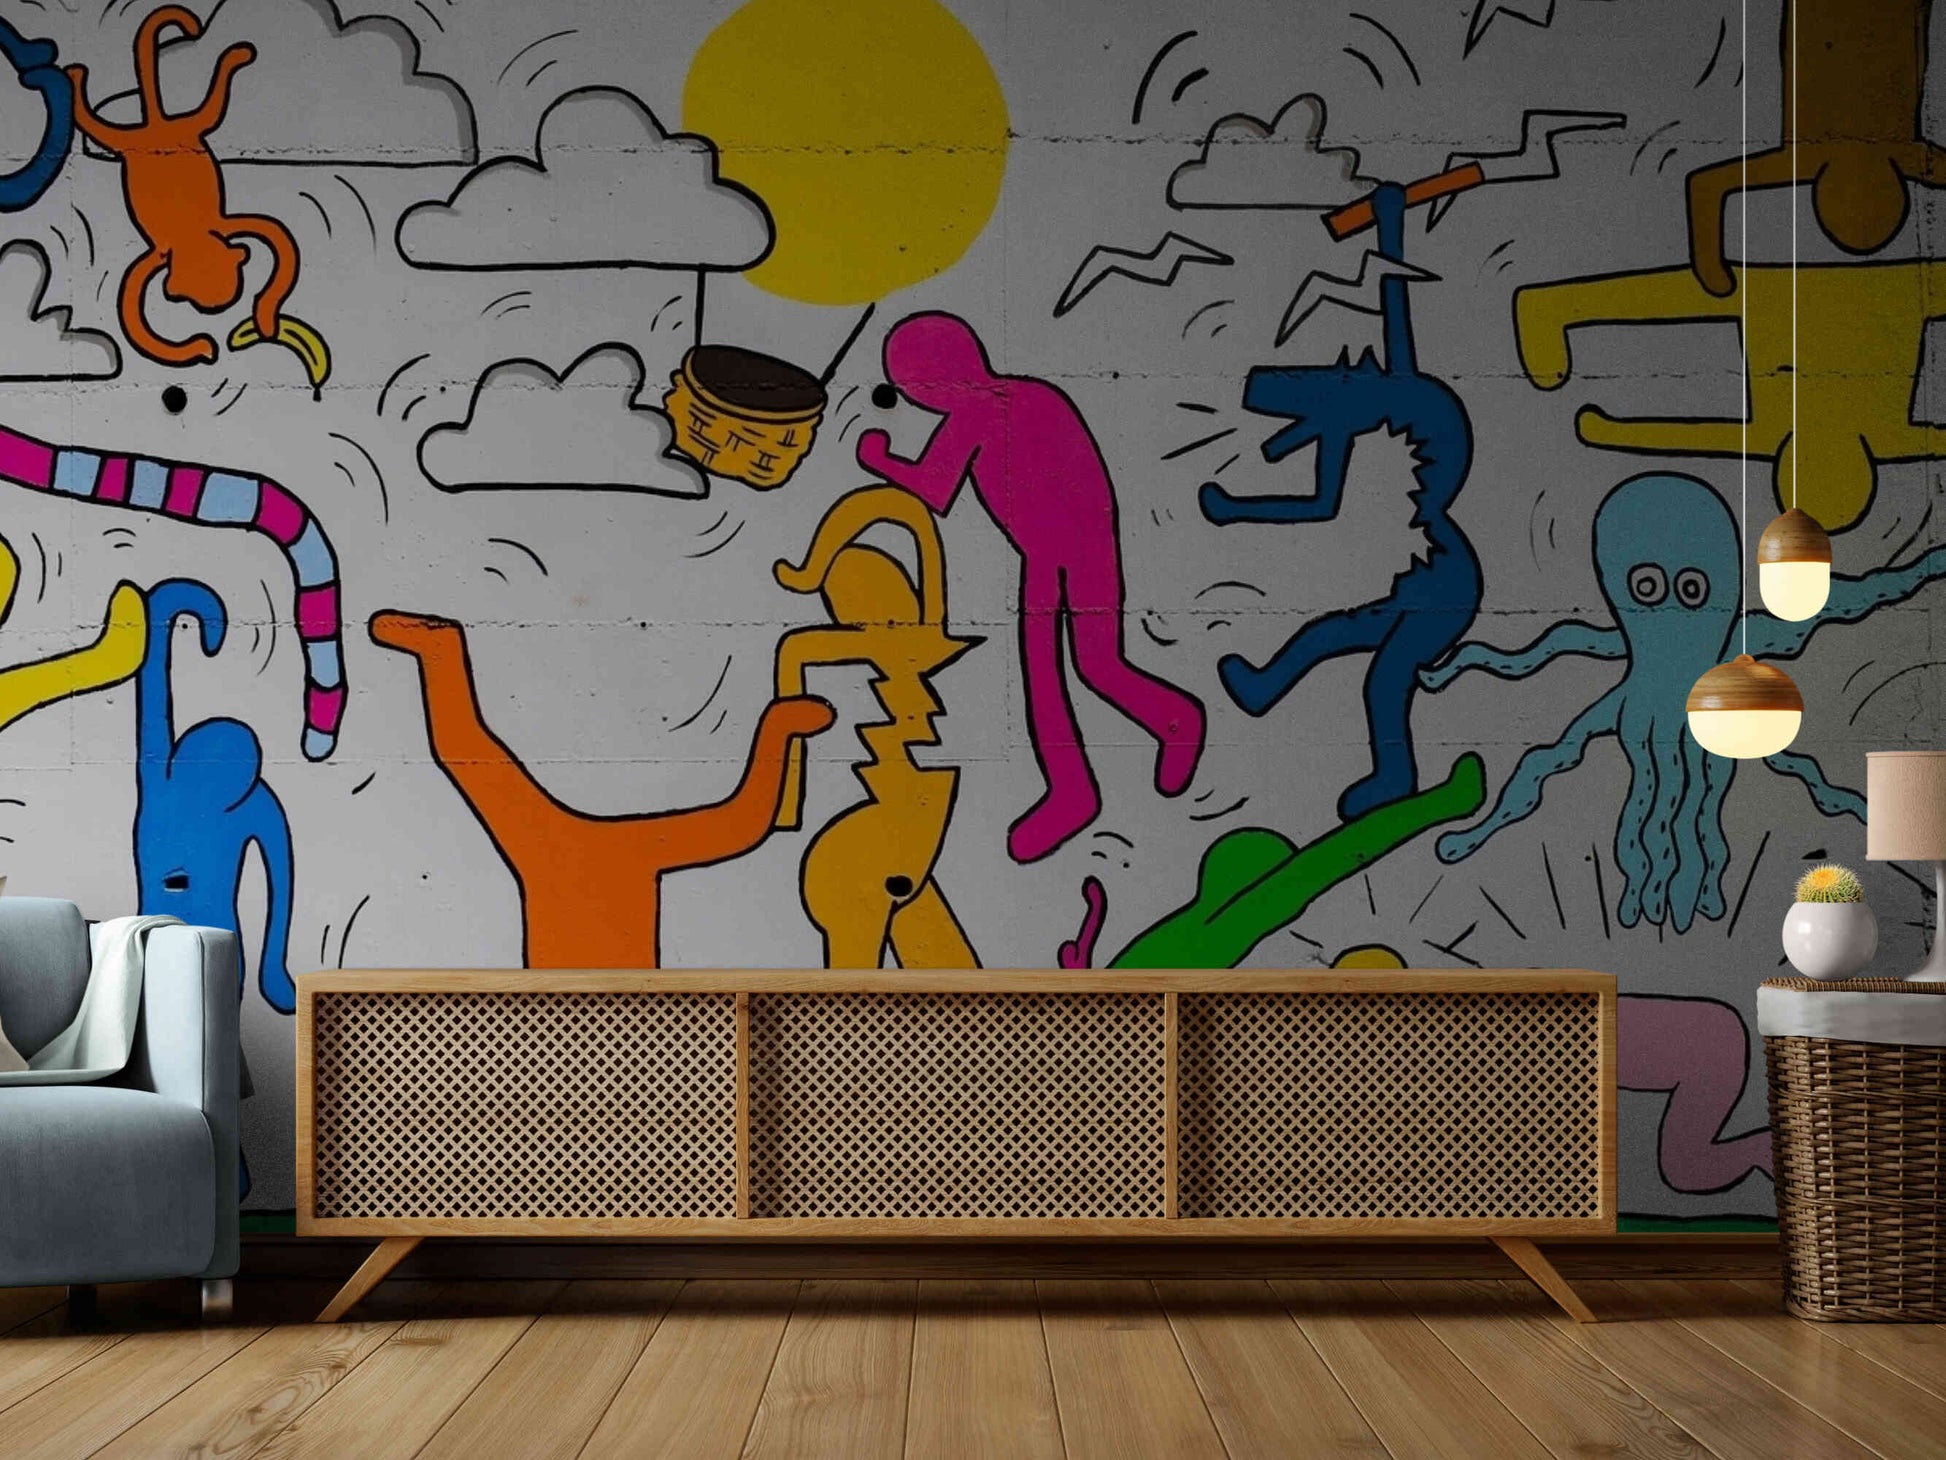 Comic culture meets urban art in this graffiti wall mural, featuring bold colors and iconic characters